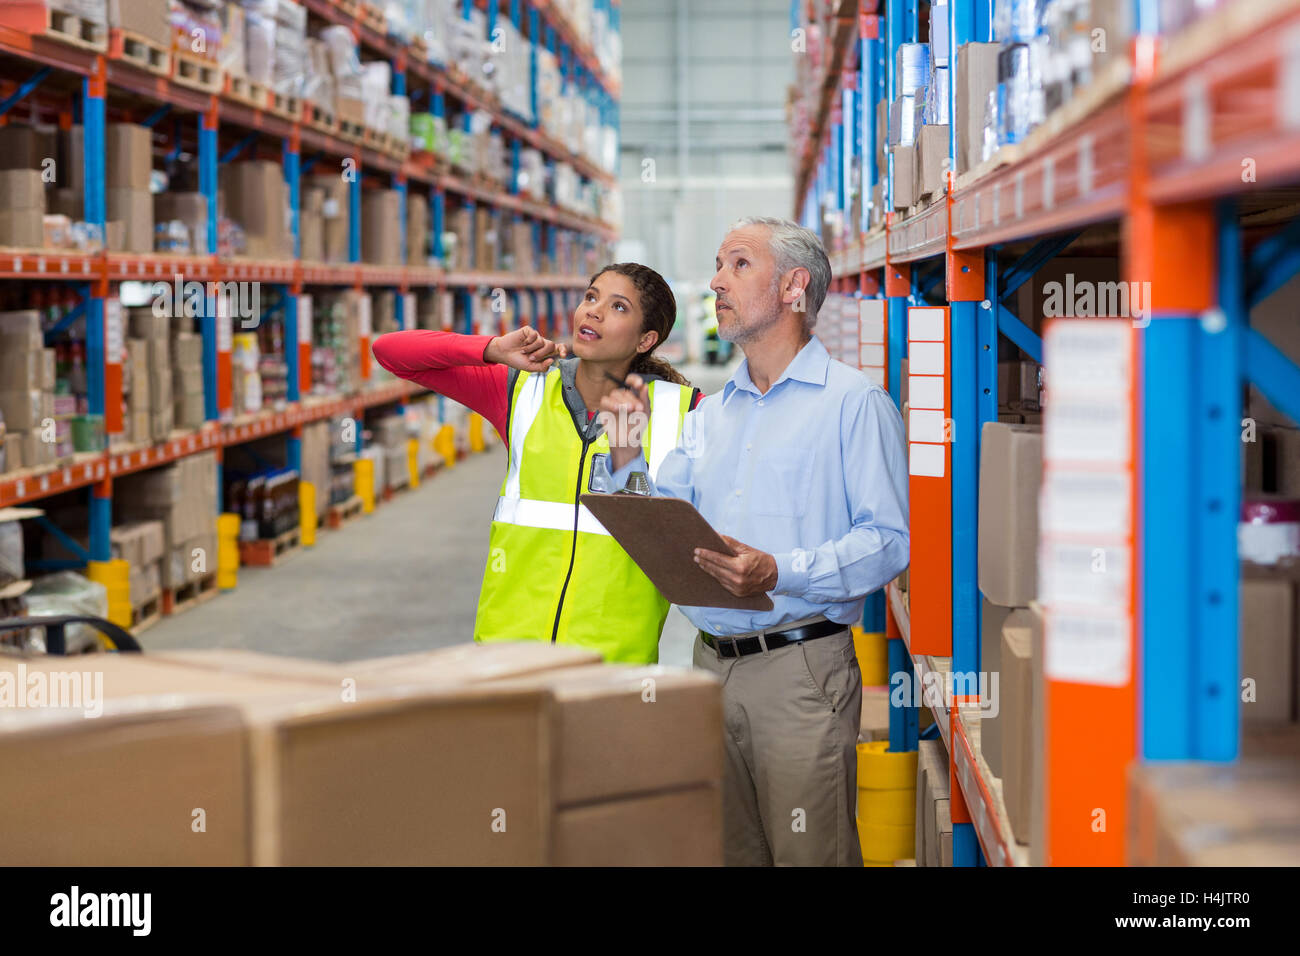 Warehouse manager and female worker interacting while checking inventory Stock Photo